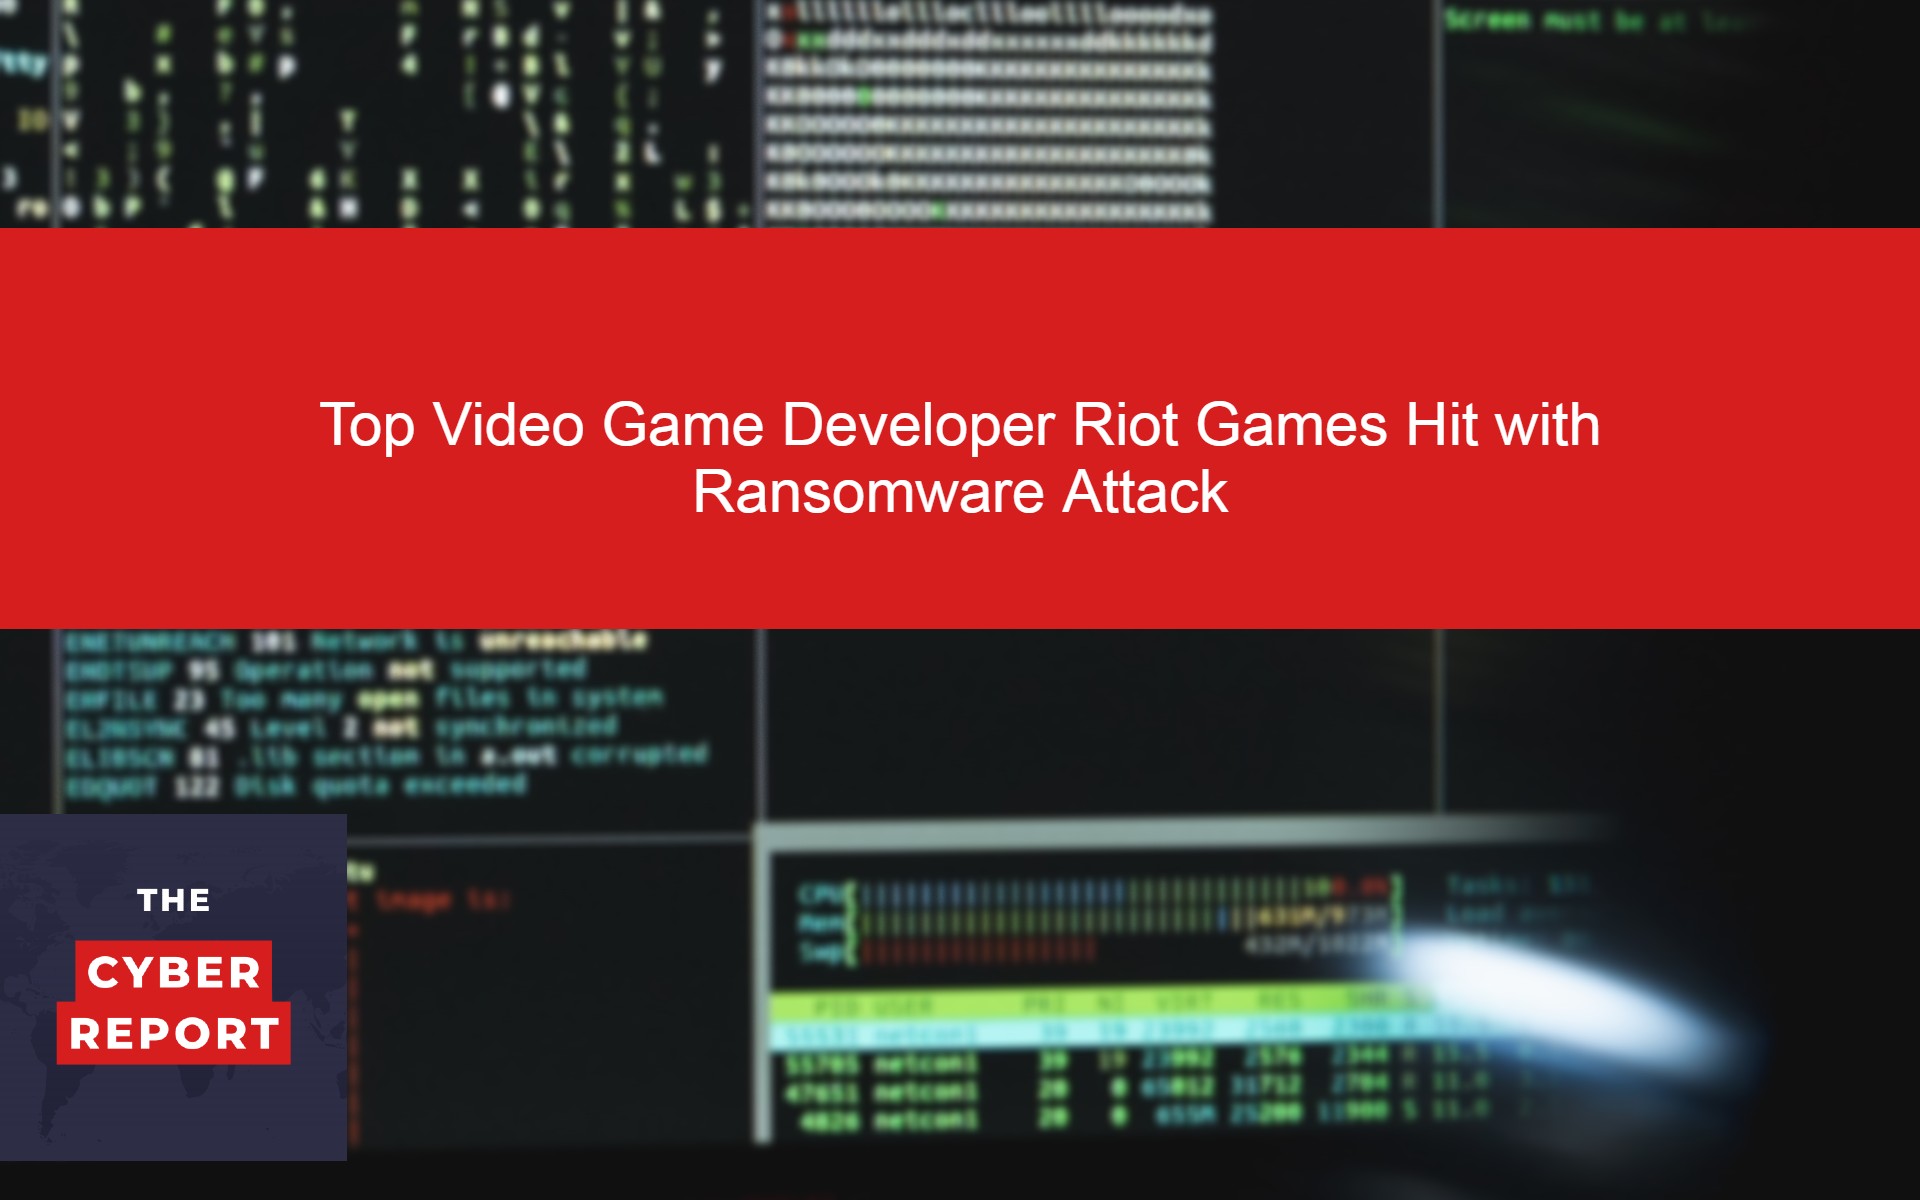 Top Video Game Developer Riot Games Hit with Ransomware Attack